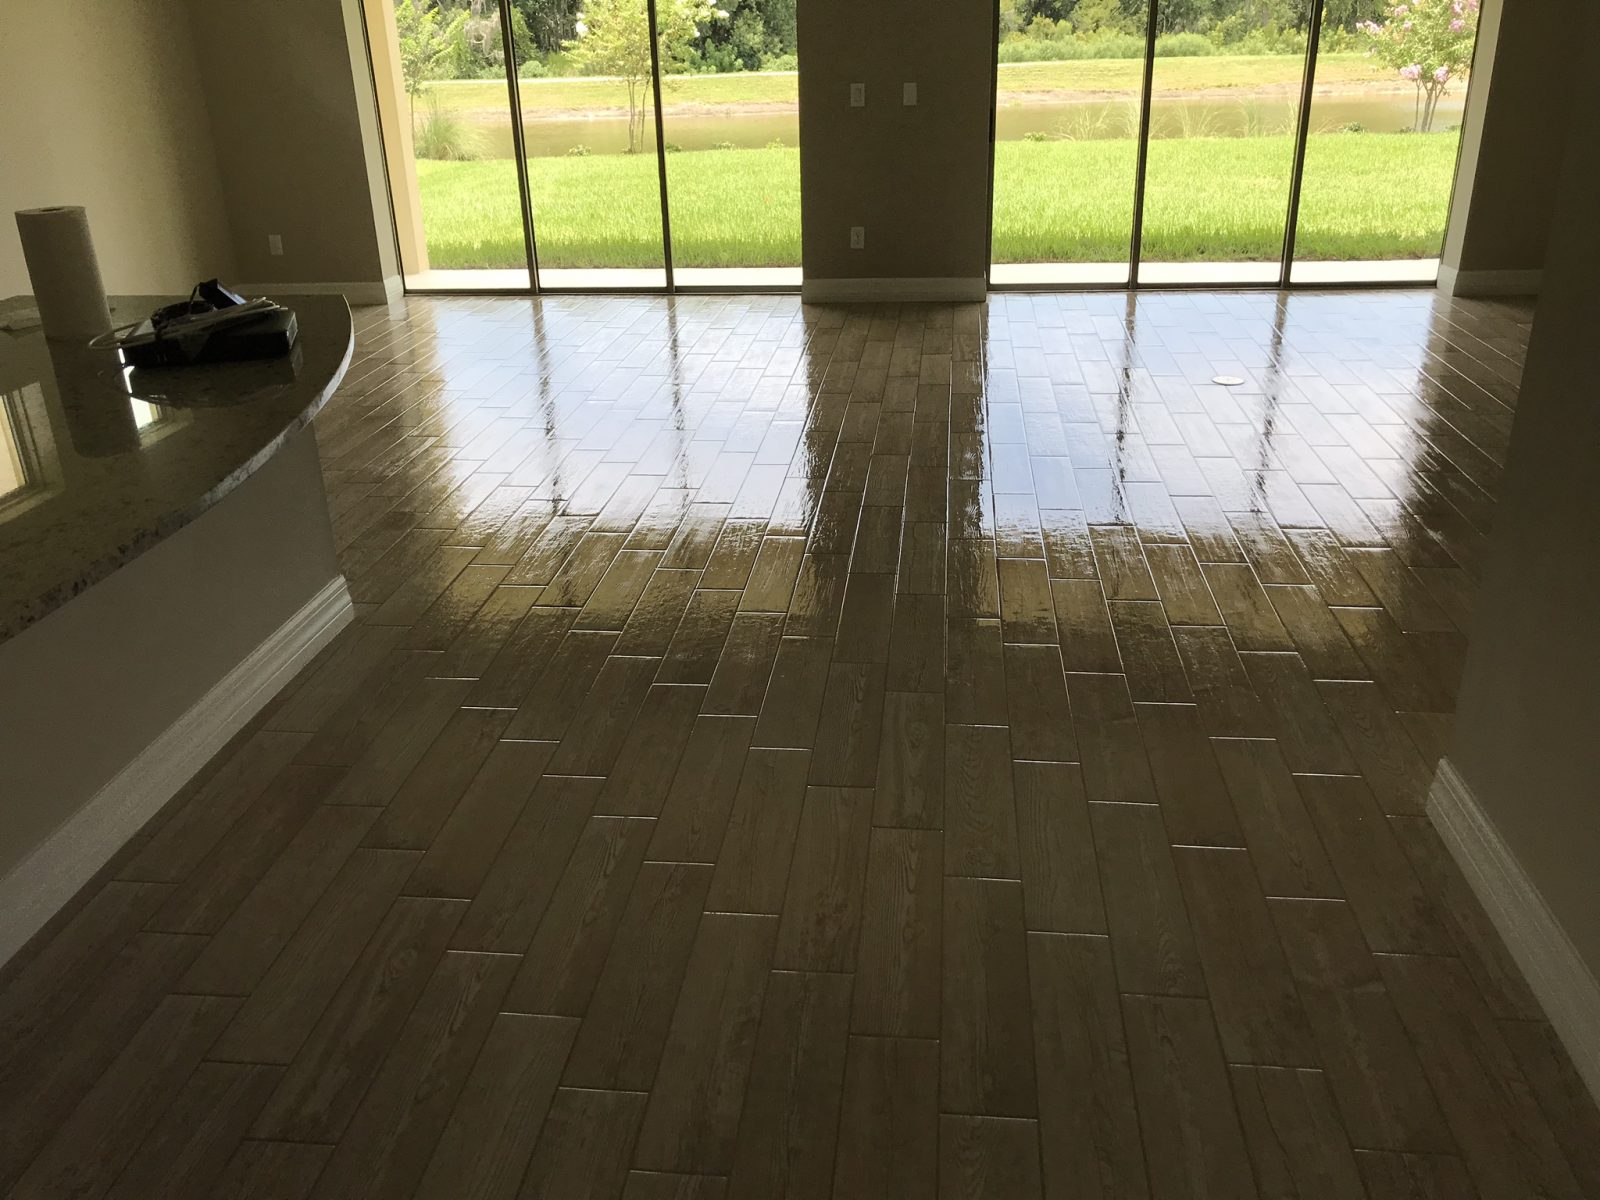 Professional Tile & Grout Cleaning Oldsmar Florida by Howards Cleaning Service